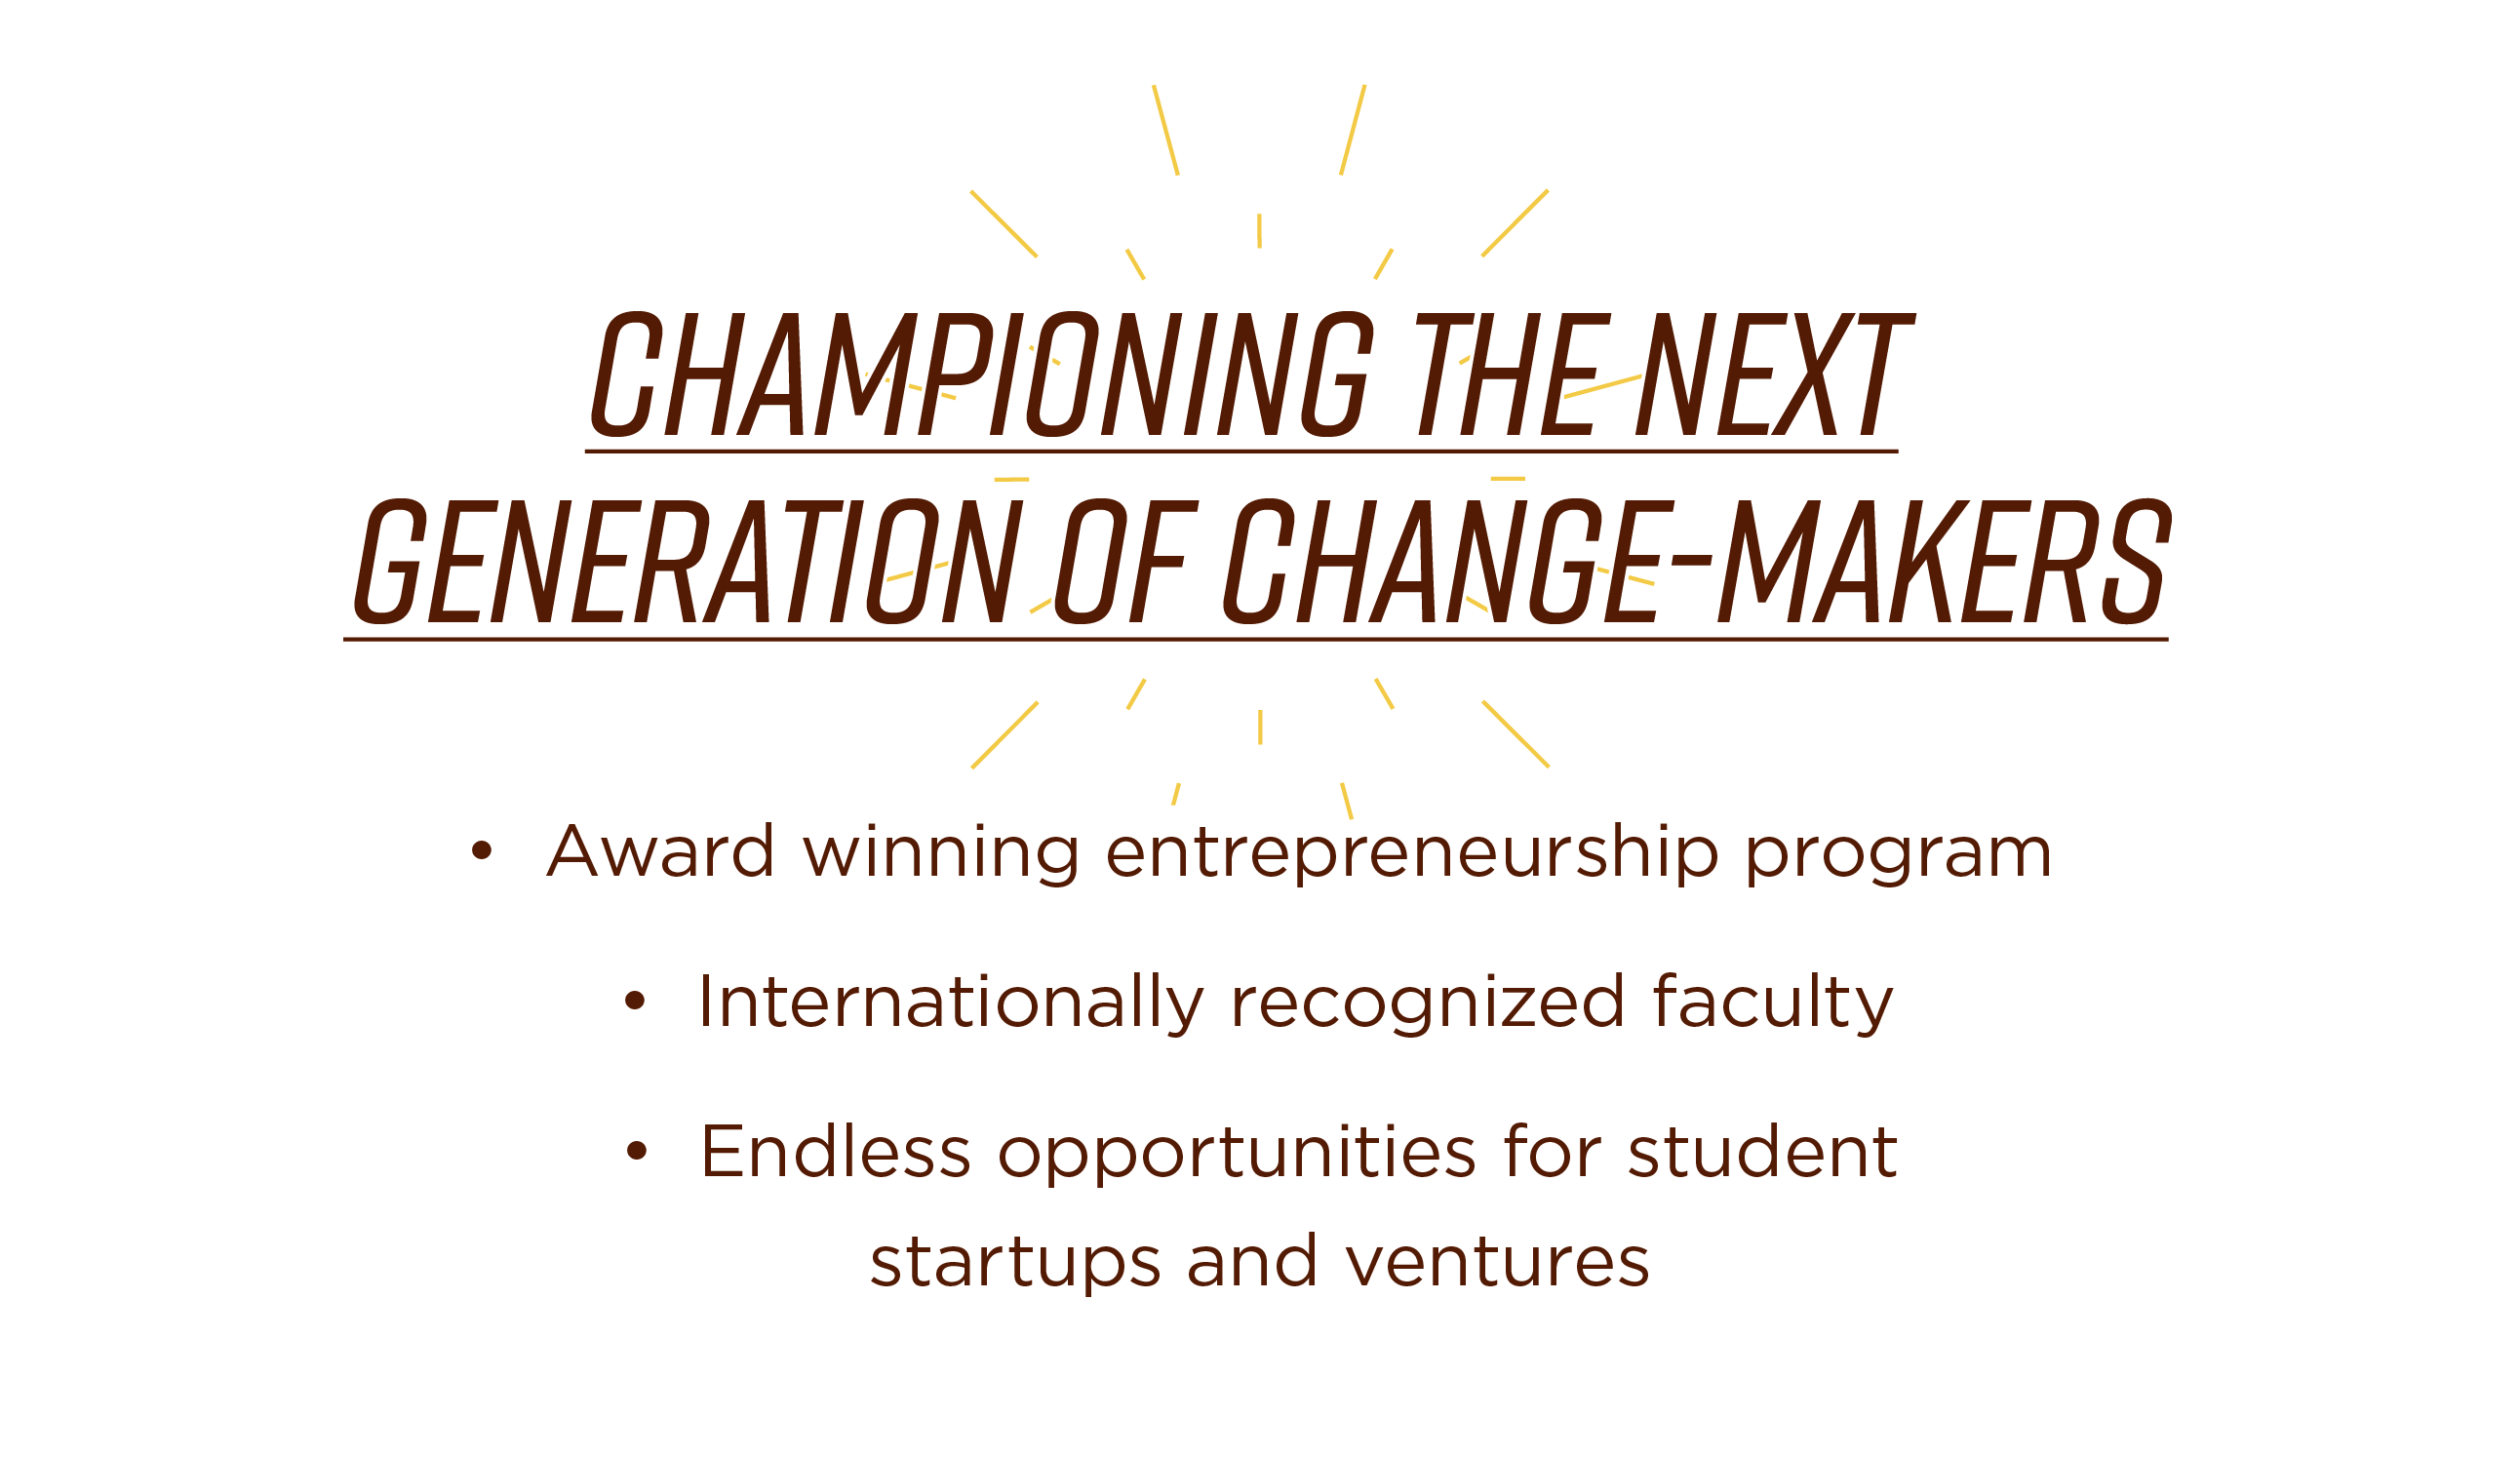 Championing the next generation of change-makers. Award winning entrepreneurship program; Internationally recognized faculty; Endless opportunities for student startups and ventures